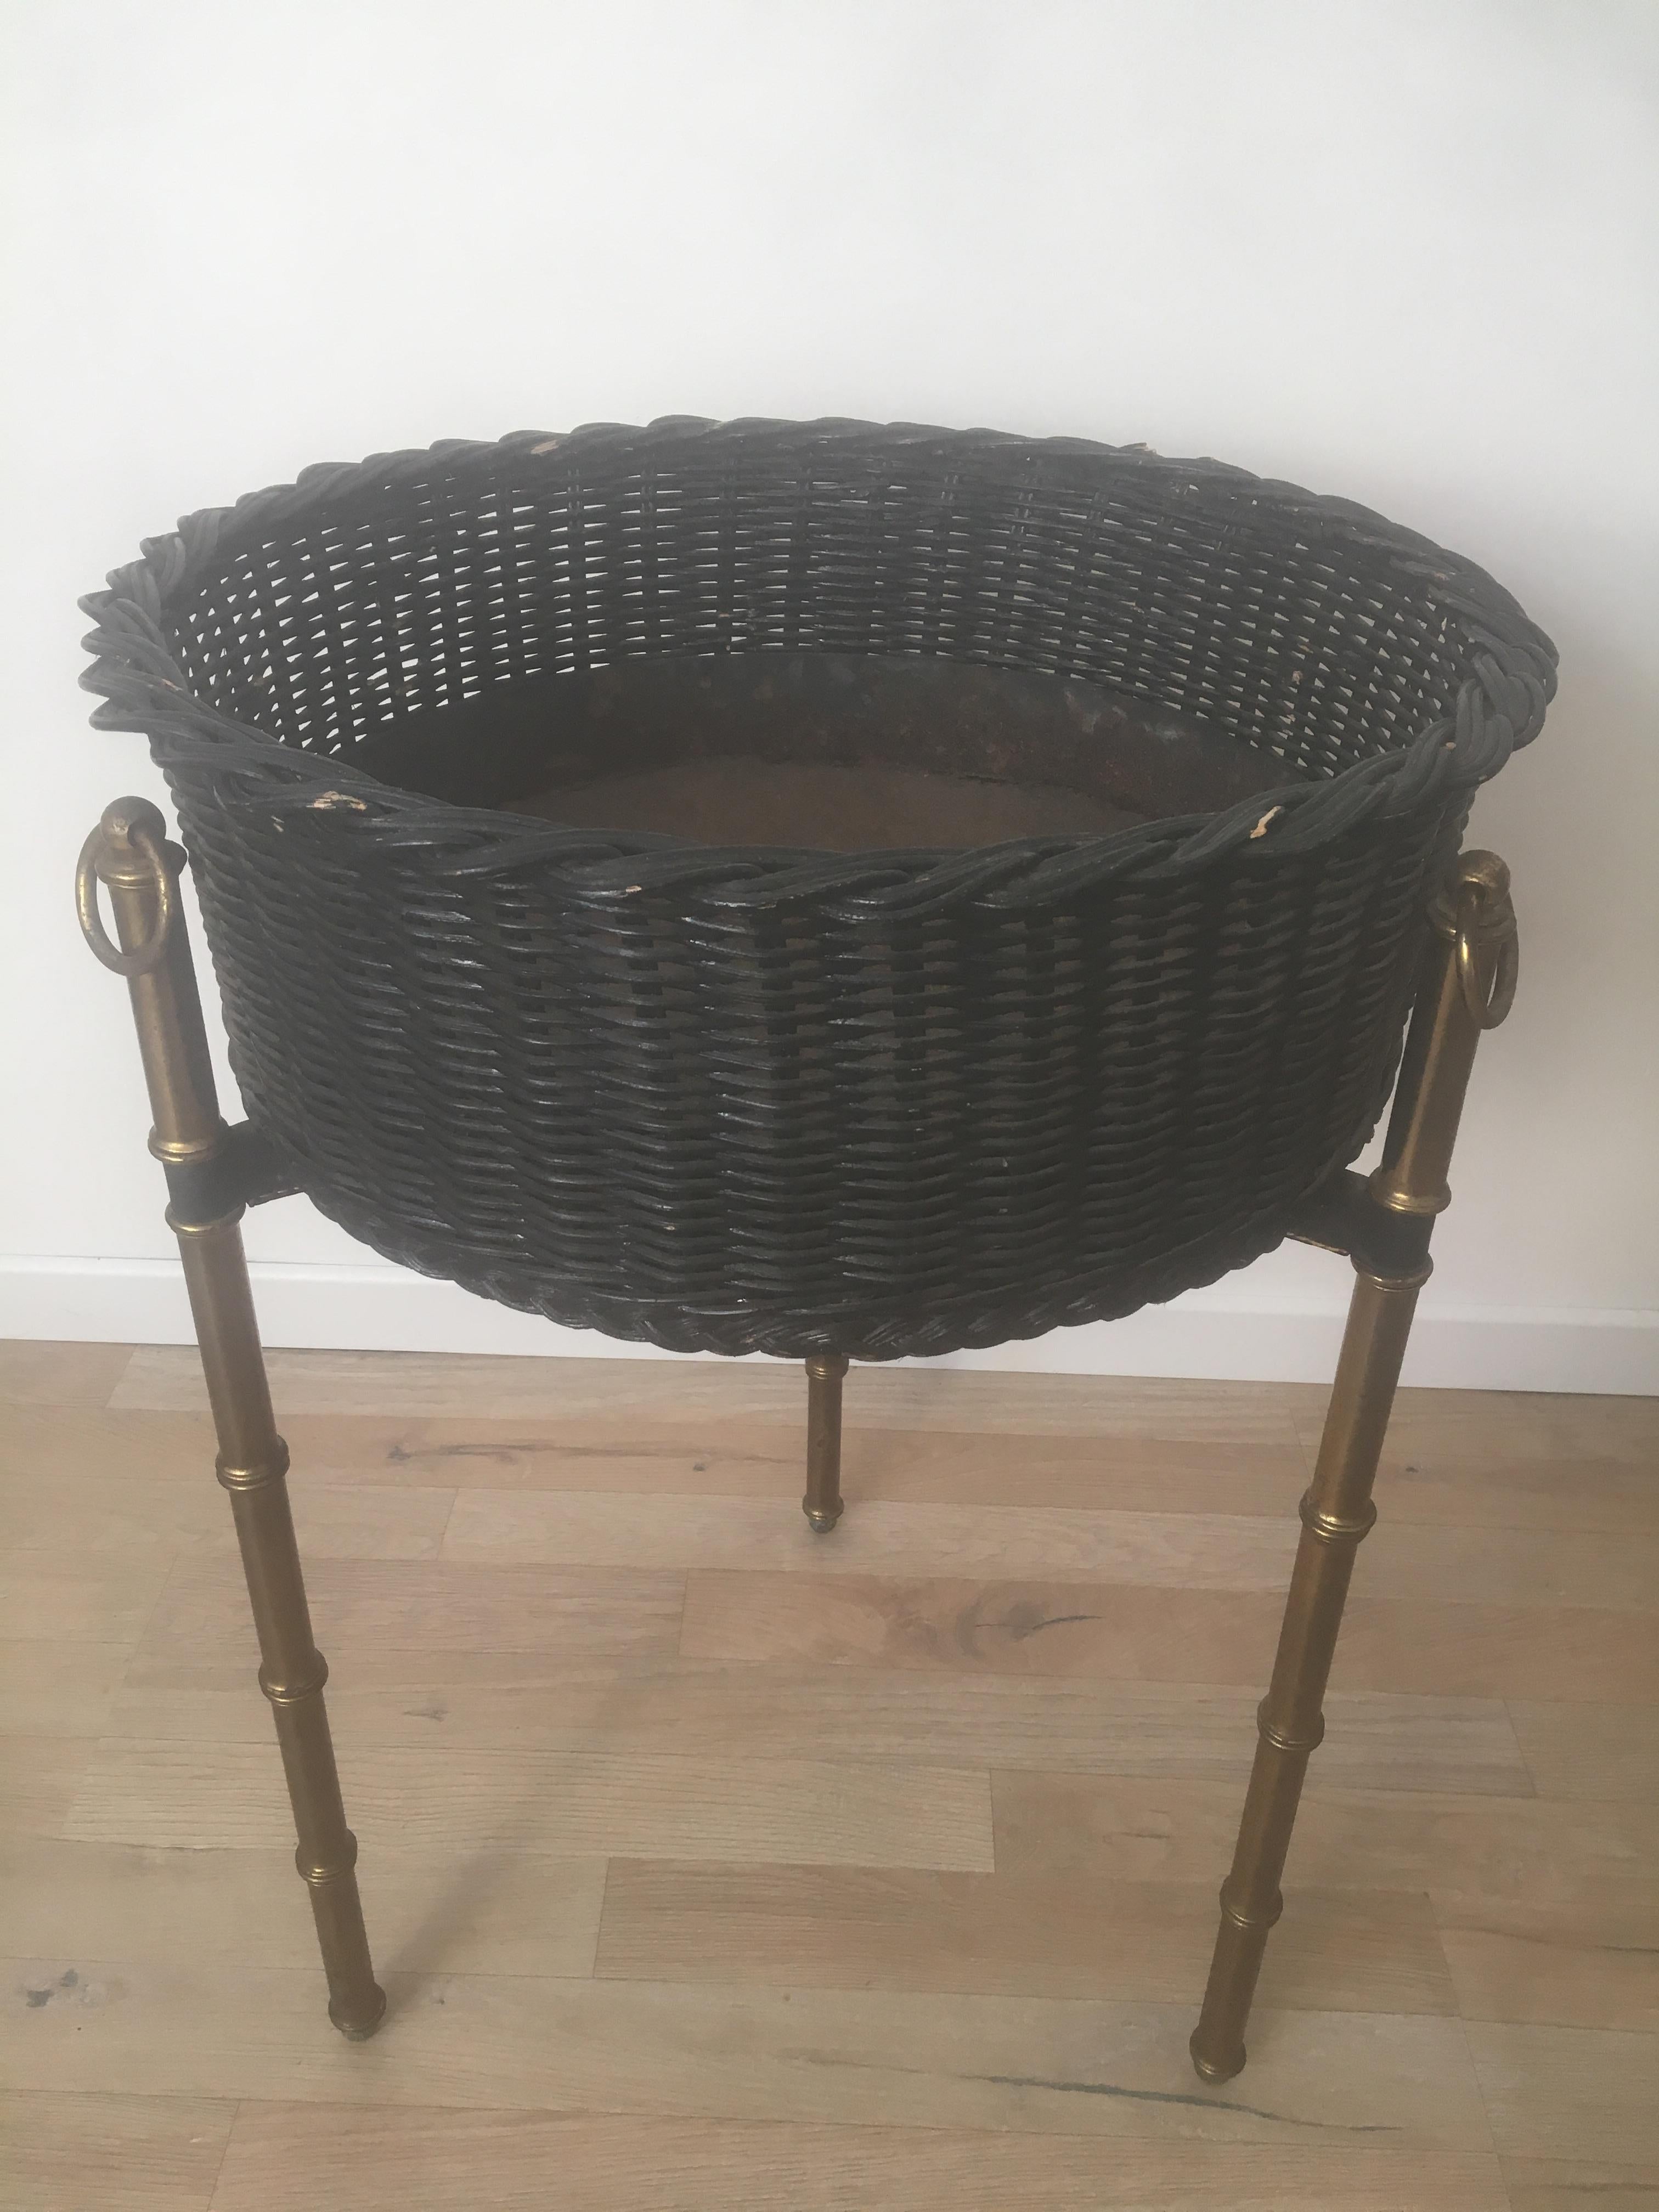 Painted  Jacques Adnet Black Rattan Indoor Planter, Bamboo Gilt Metal Legs, French 1950s For Sale